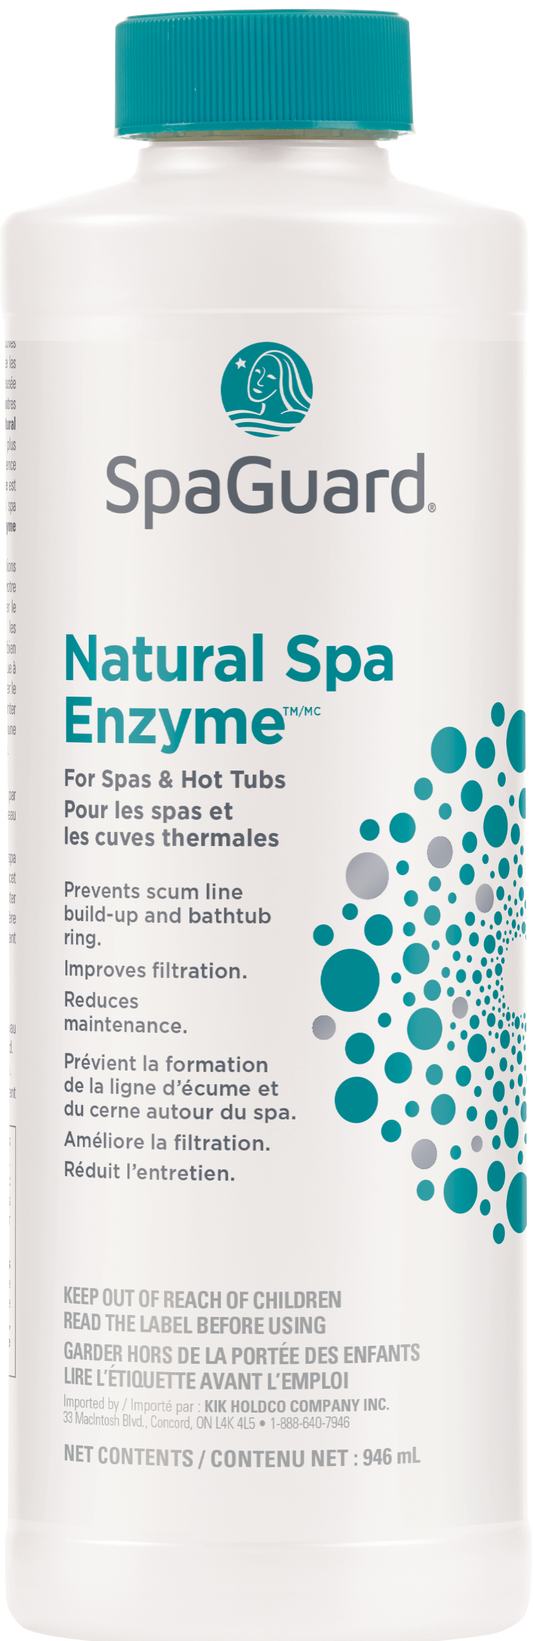 Natural Spa Enzyme